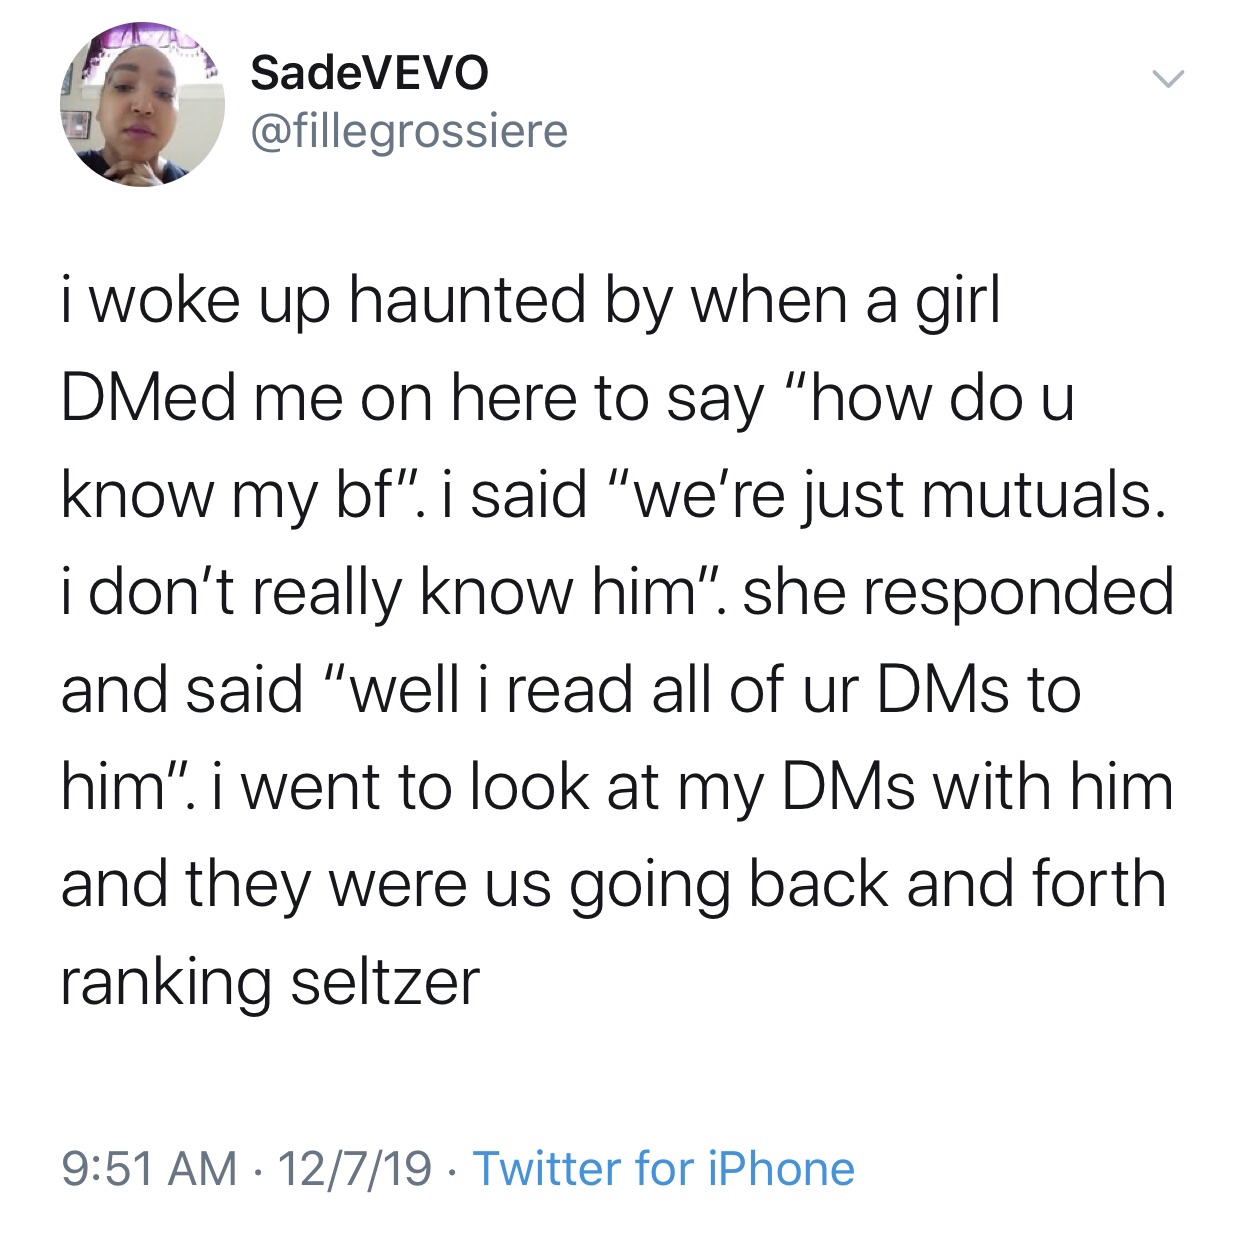 error monkeys message meme - SadeVEVO i woke up haunted by when a girl DMed me on here to say "how do u know my bf". i said "we're just mutuals. i don't really know him". she responded and said "well i read all of ur DMs to him". i went to look at my DMs 